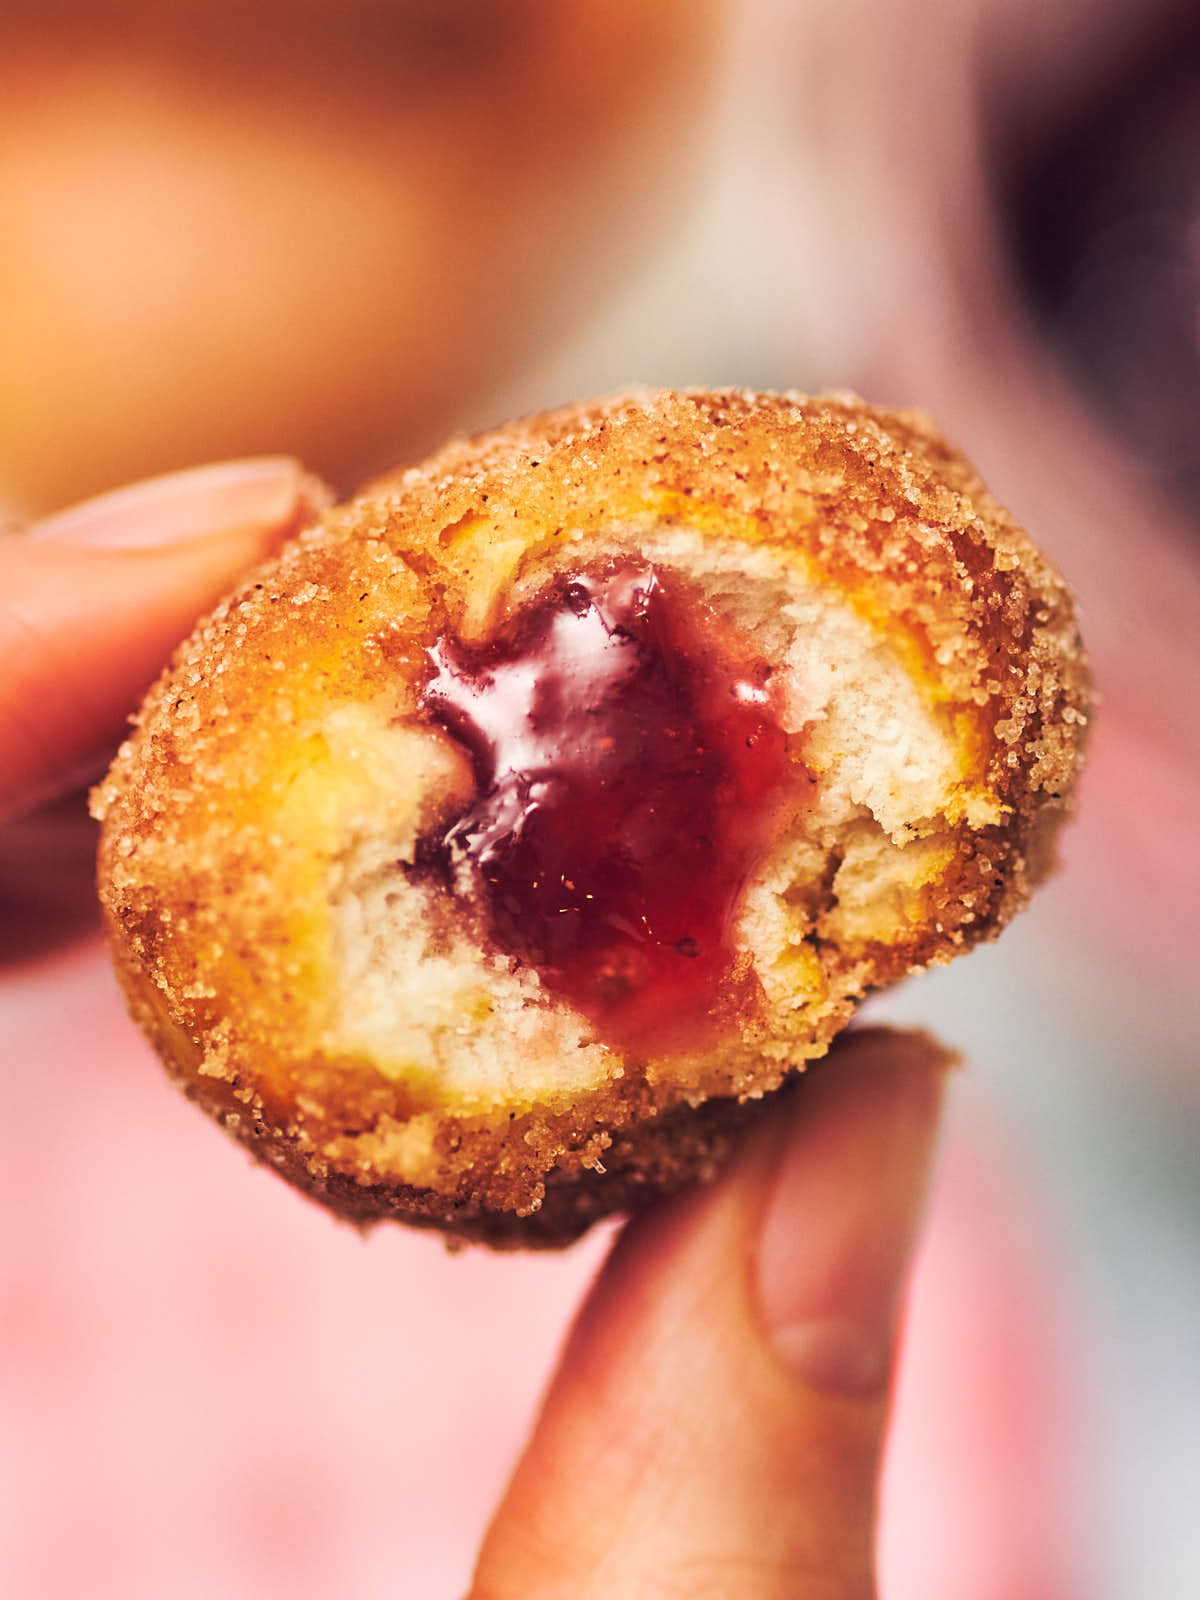 A cinnamon sugar air fried donut filled with strawberry jelly.